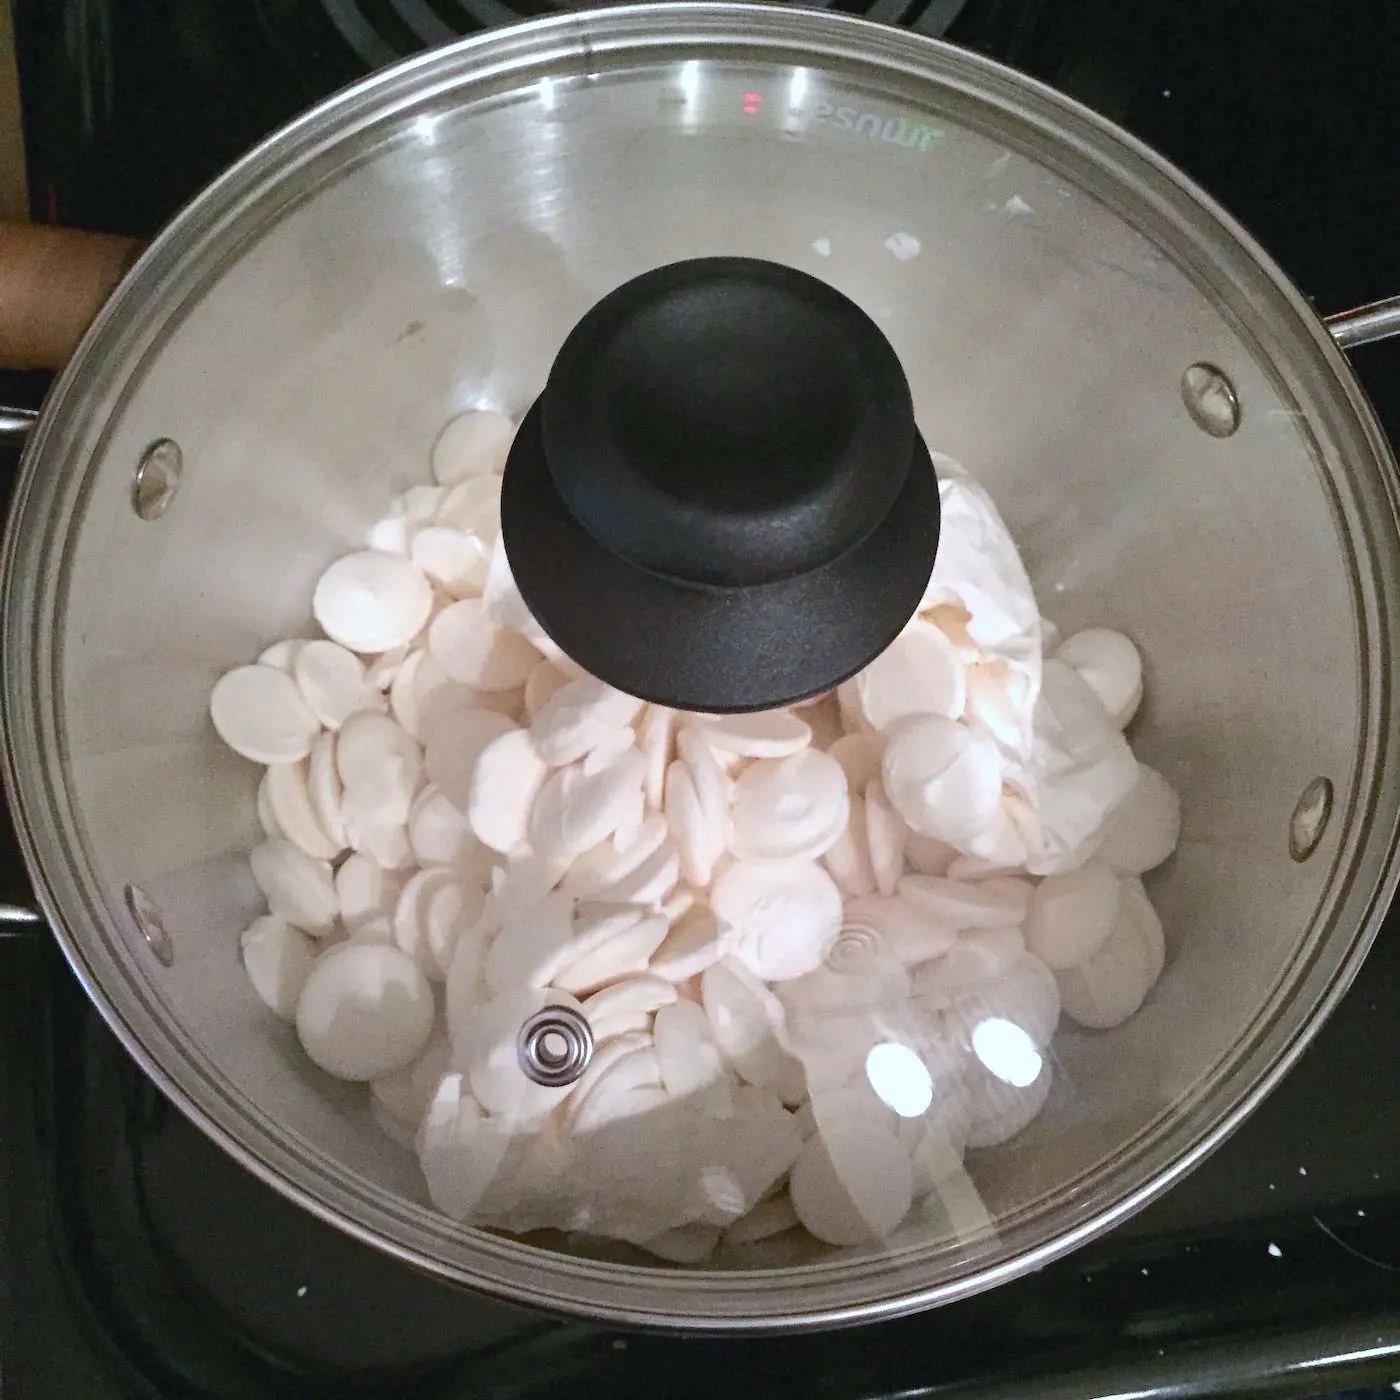 Candy melts in a sauce pan with the lid on